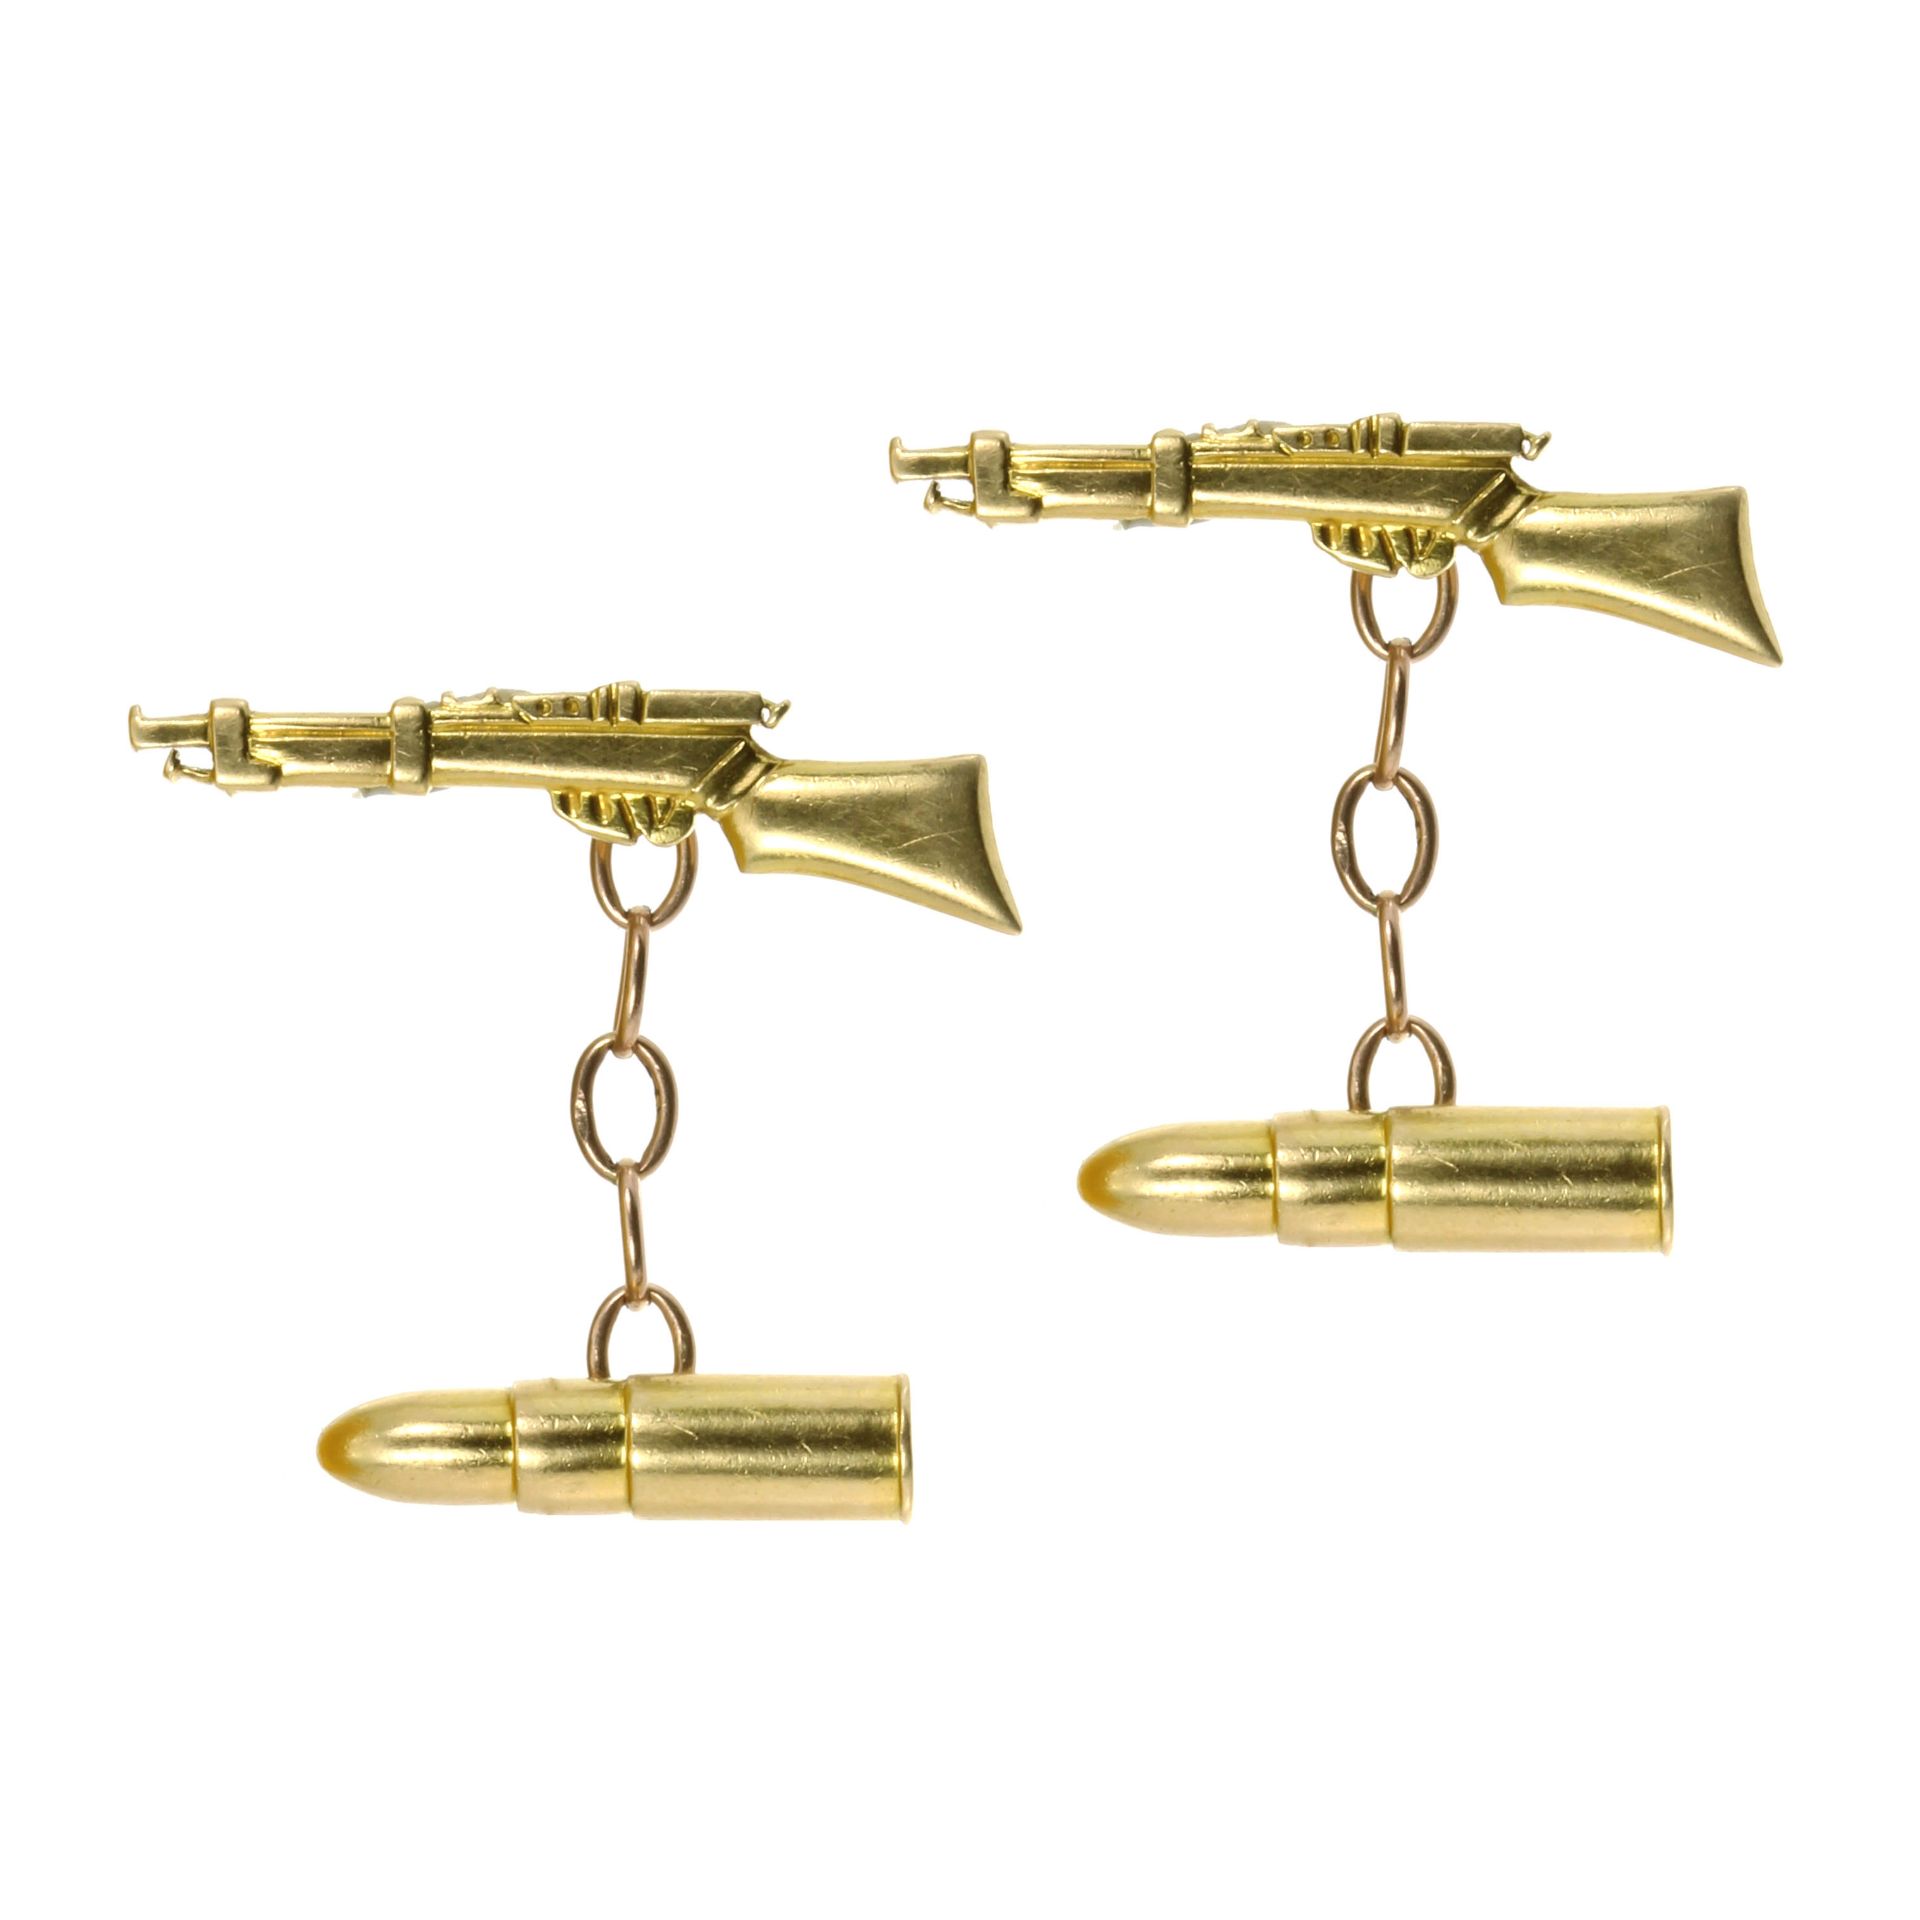 A PAIR OF GUN / PISTOL AND BULLET CUFFLINKS in yellow gold, each comprising two links modeled as a